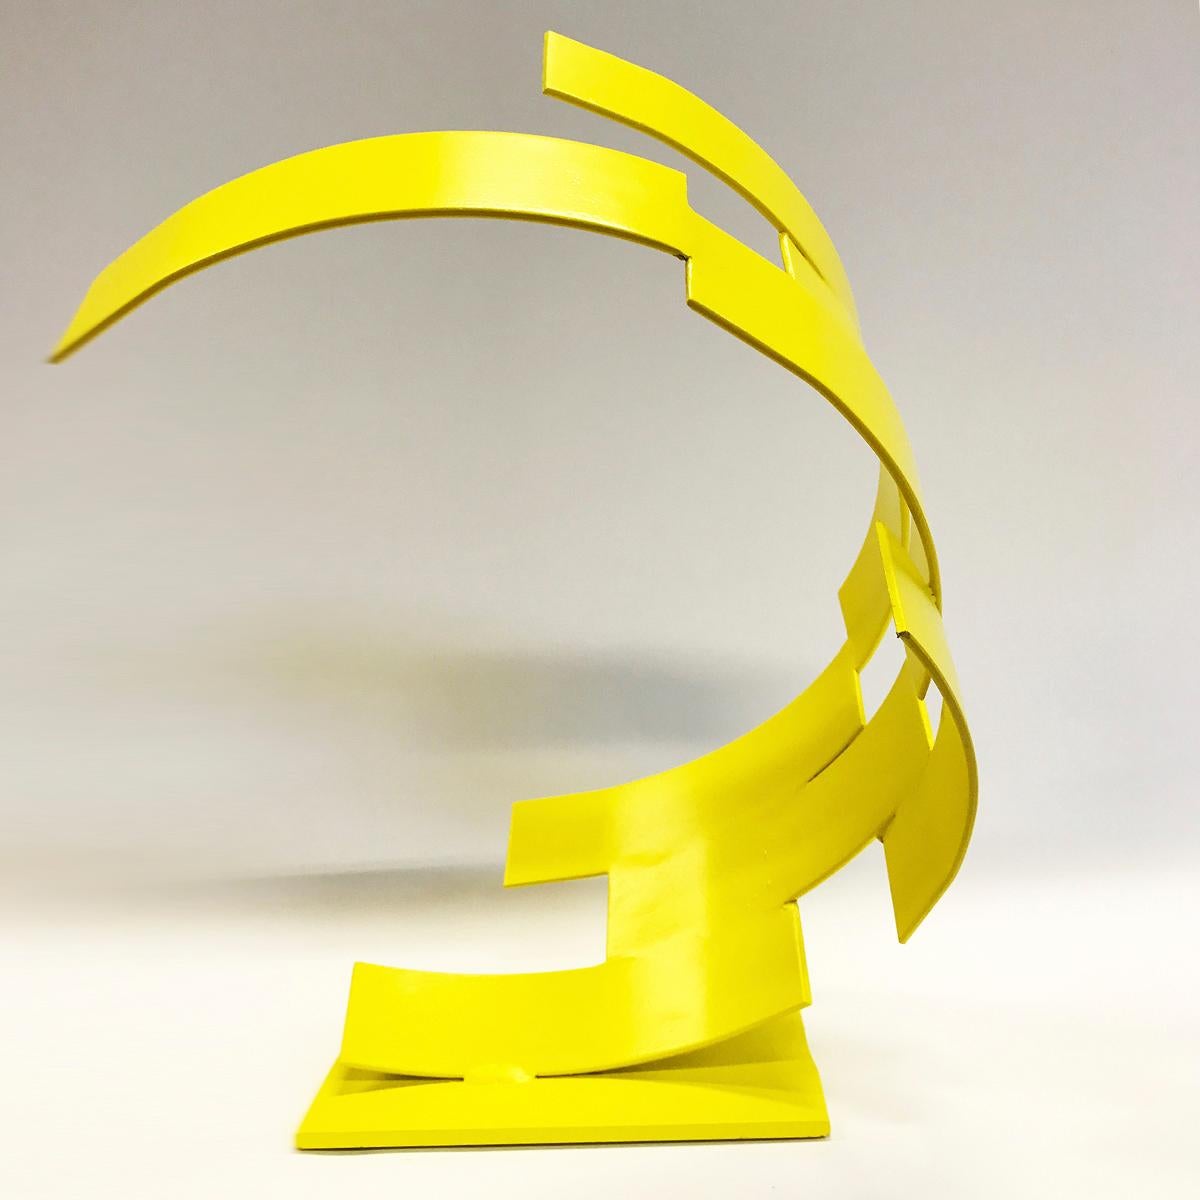 With vivid colours and abstract shapes, Gareth's sculptures float between sculpture and architecture. His inspiration, centred on North American minimalist architecture, led him to create pieces with simplified and organic forms. The artist usually